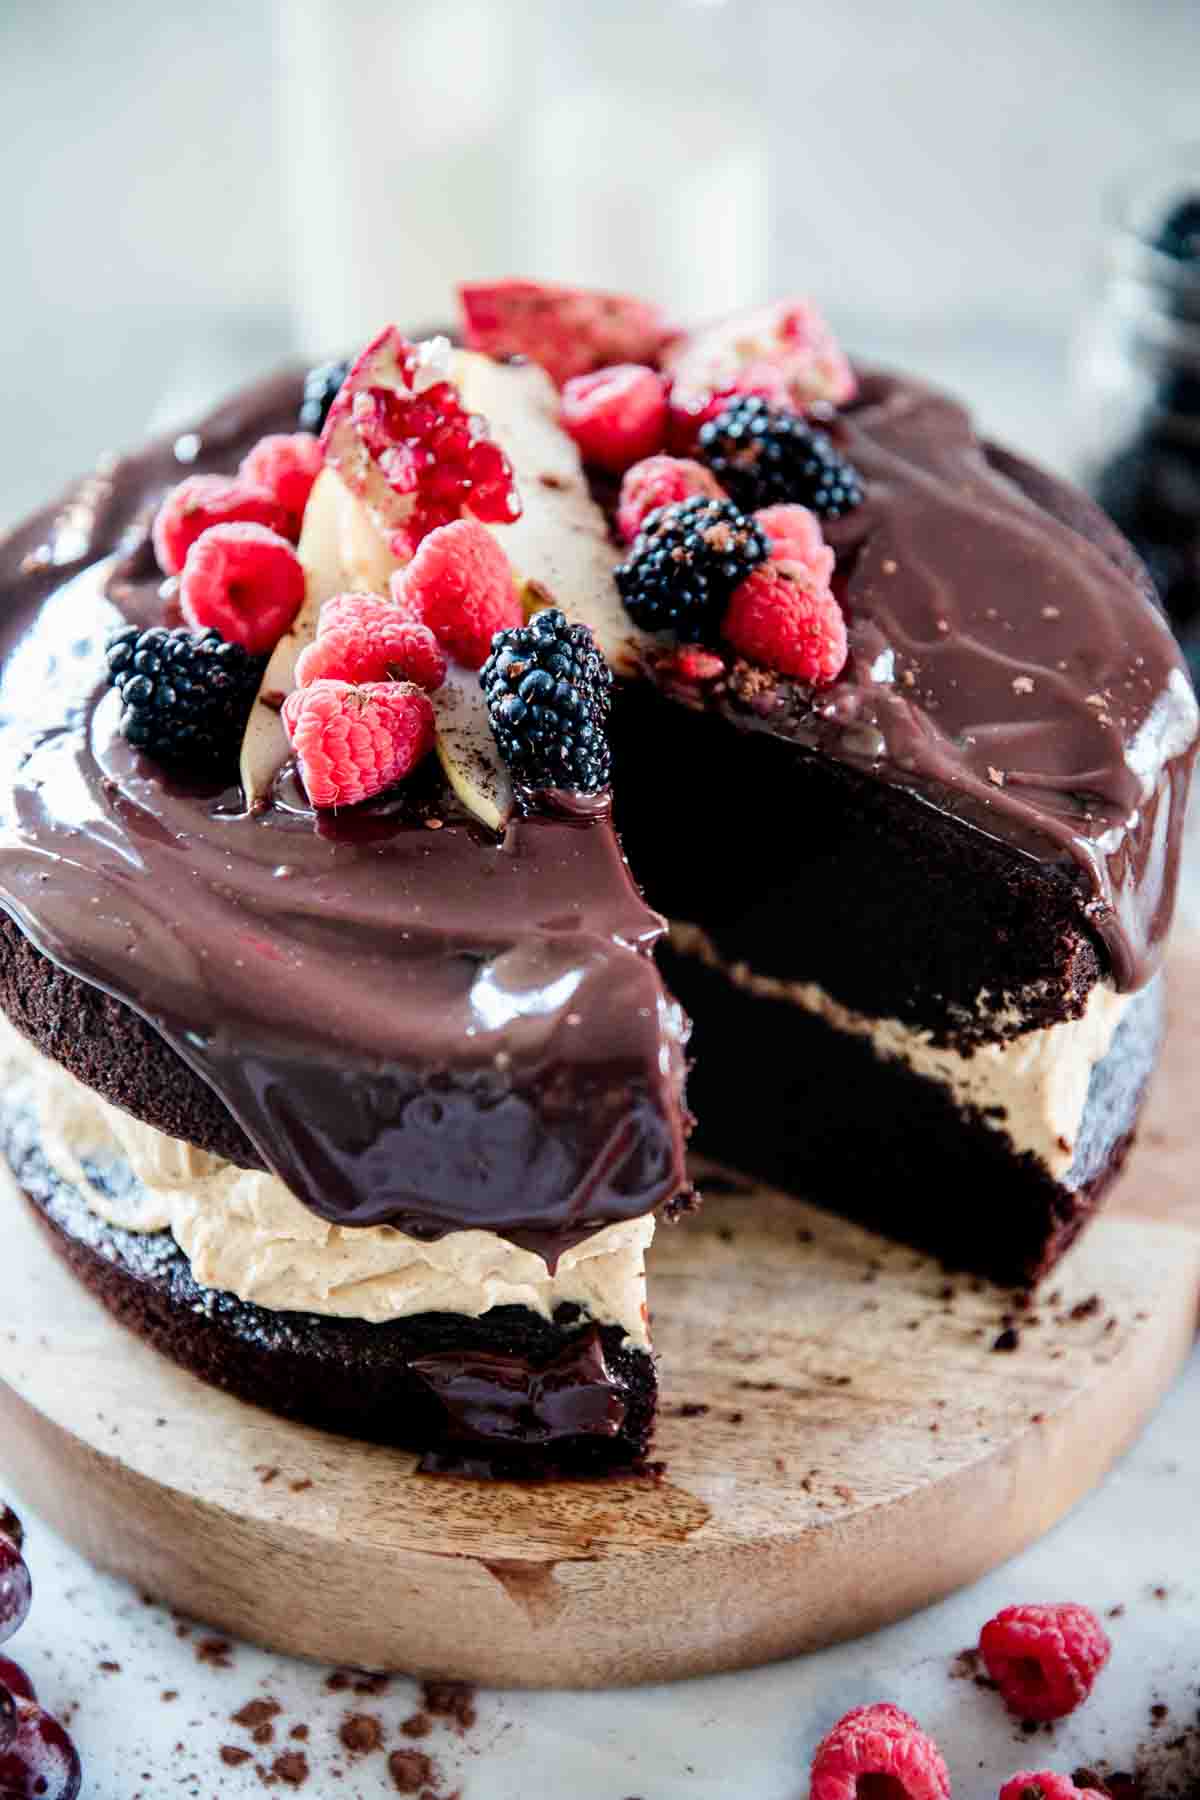 A close up of chocolate pumpkin cake. It has a pumpkin filling and is garnished with berries.